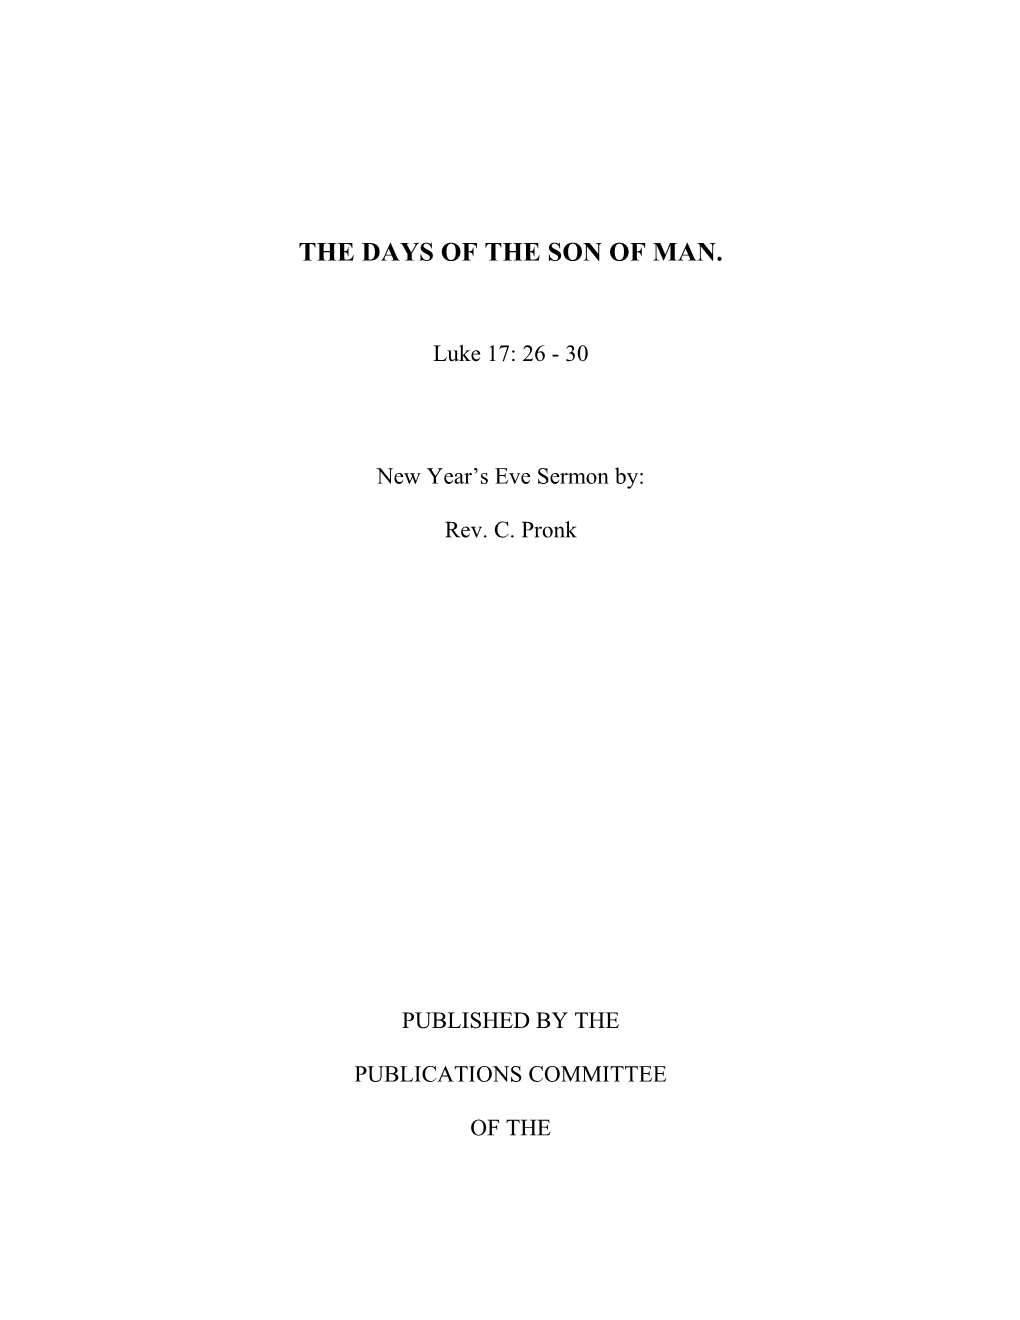 The Days of the Son of Man